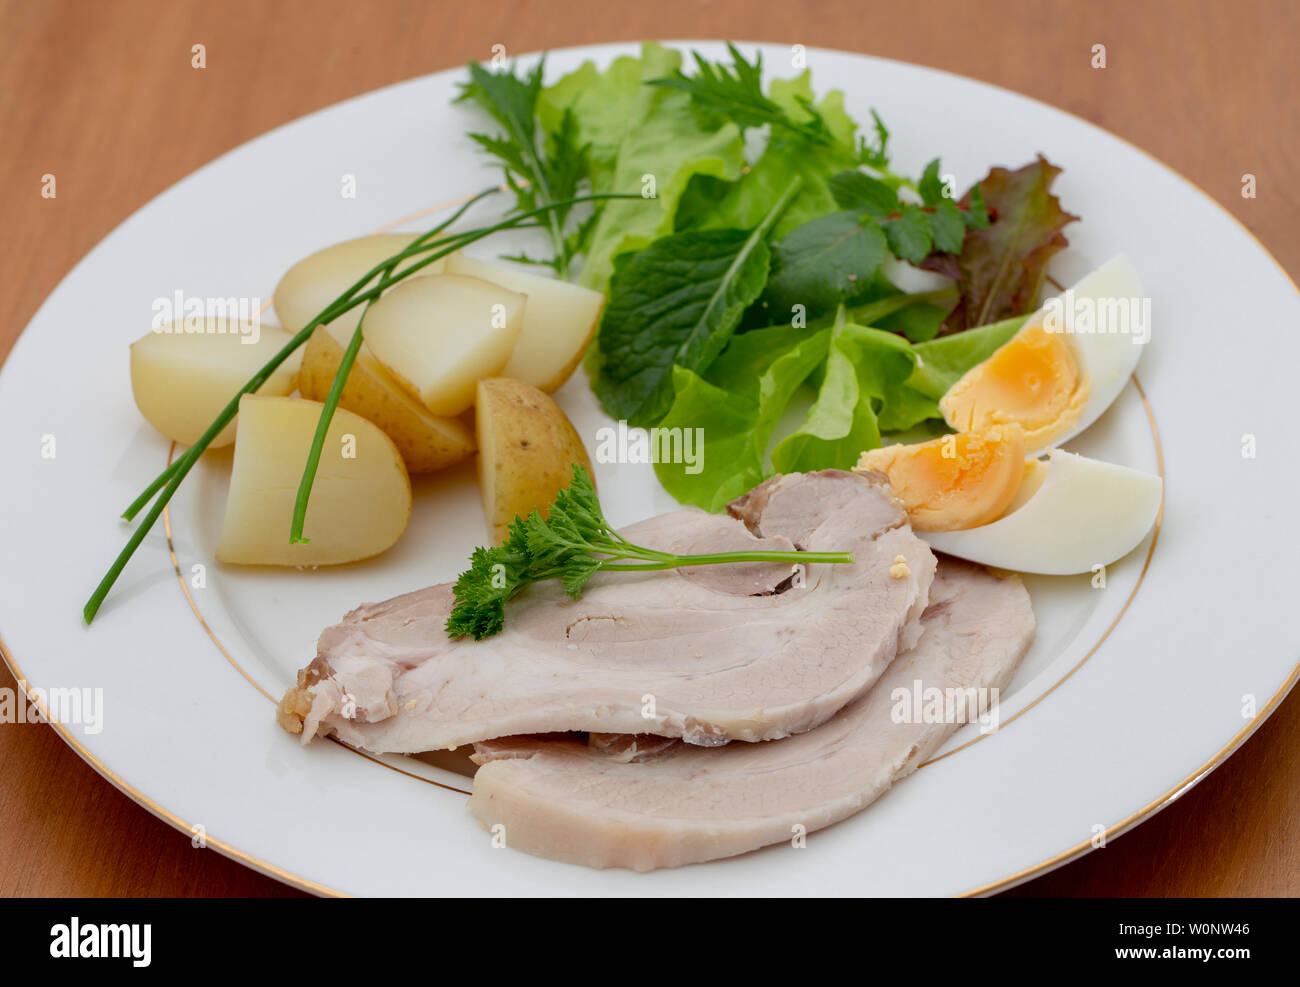 Cold sliced pork dinner with salad, potatoes and boiled egg Stock Photo